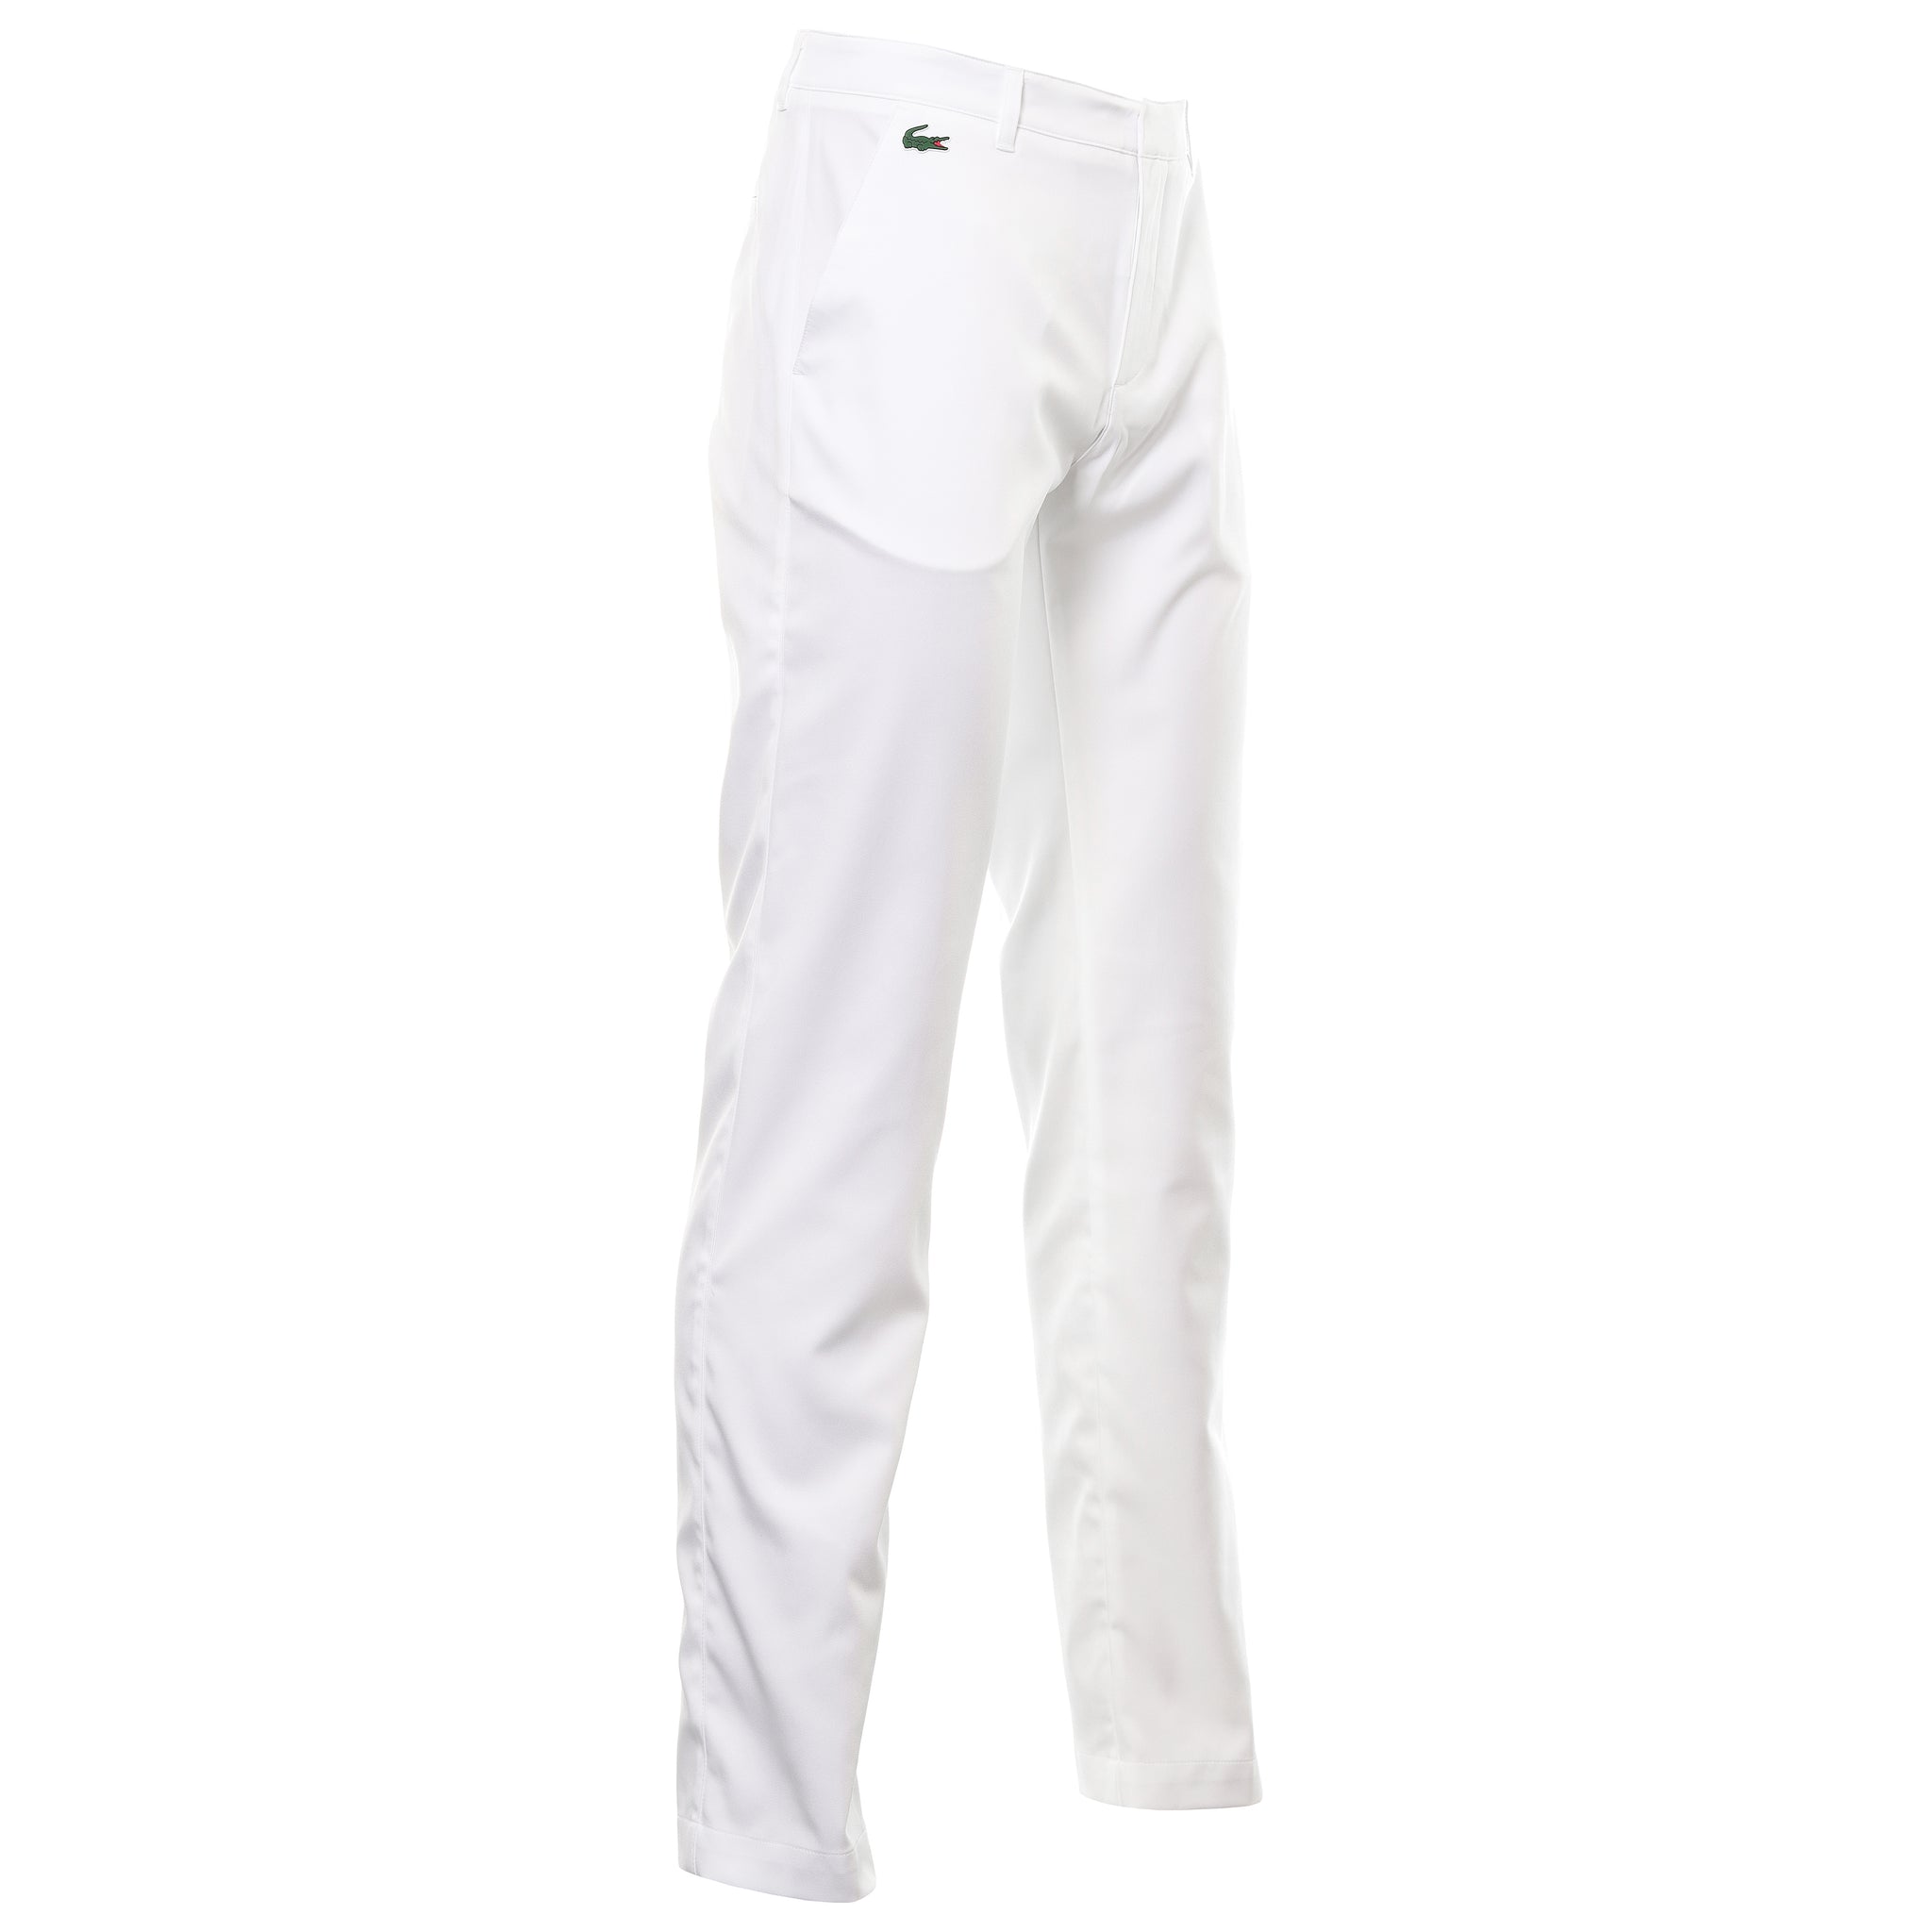 lacoste-sport-stretch-golf-chino-pants-hh3768-white-001